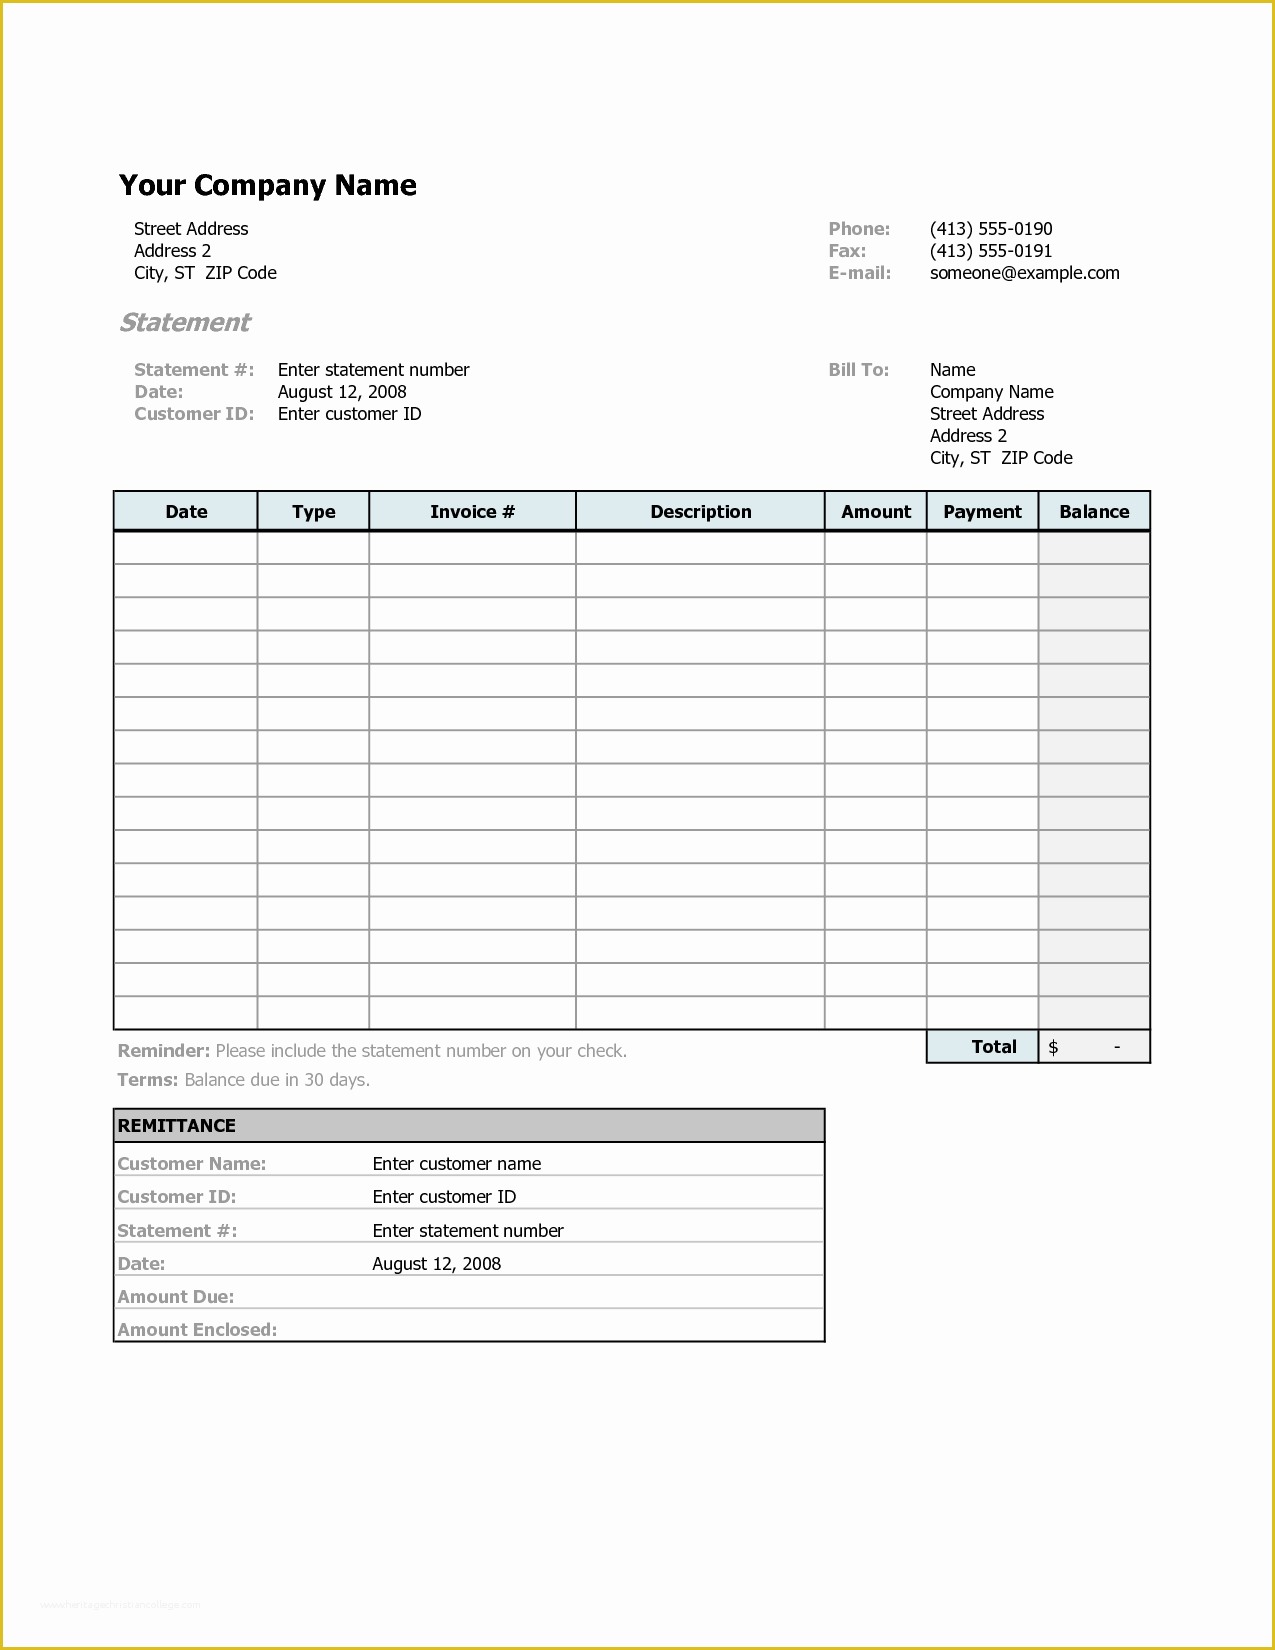 Billing Invoice Template Free Of Free Printable Billing Statement Excel Template for Your